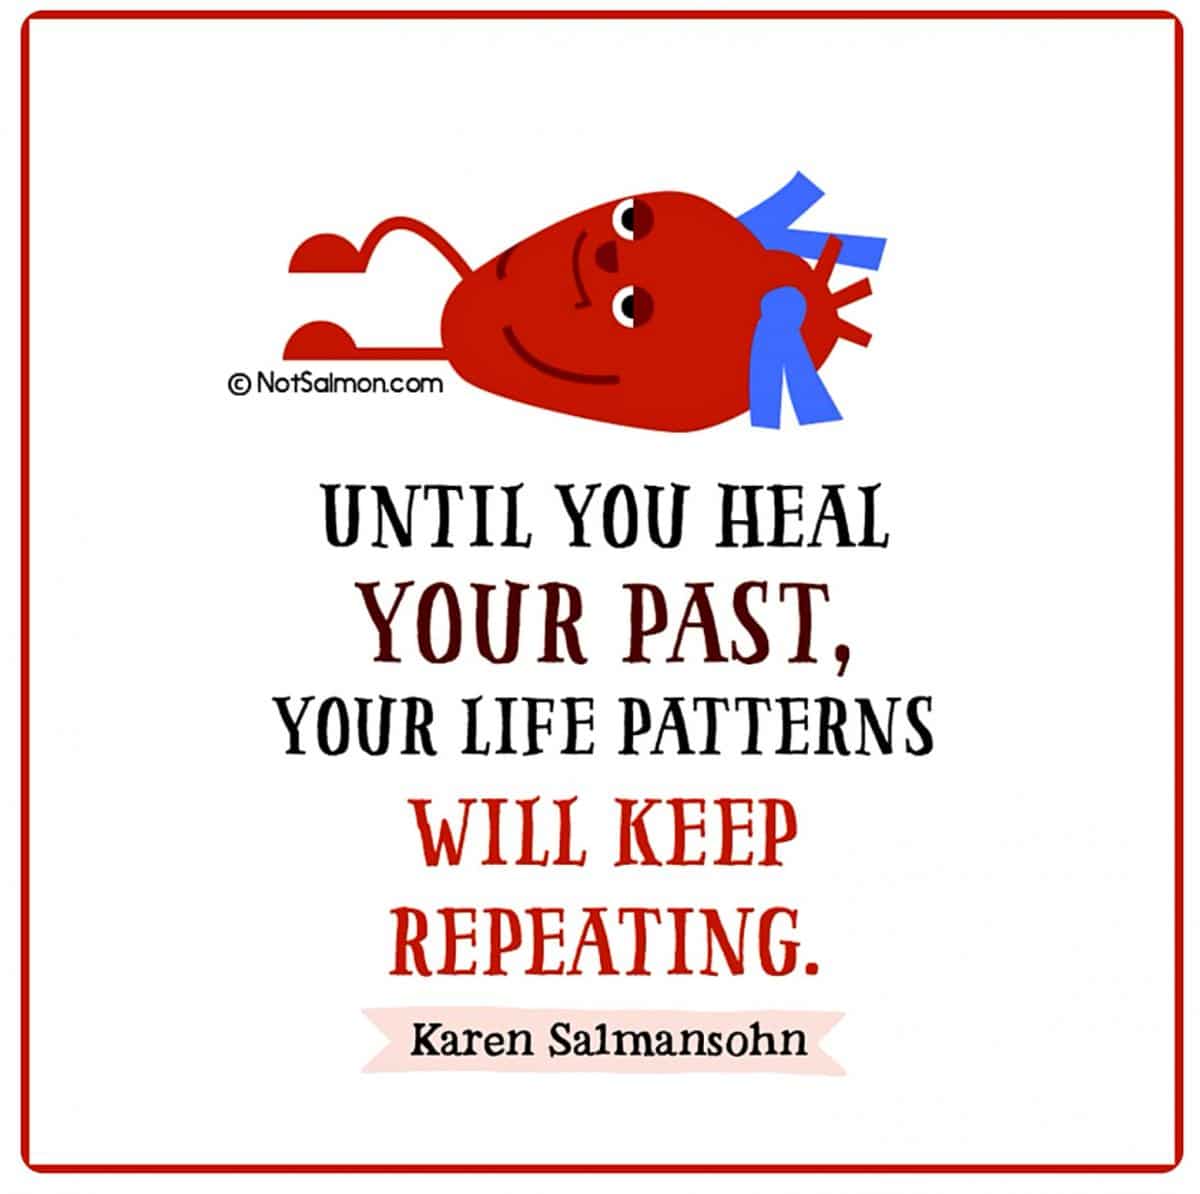 let go of the past quote